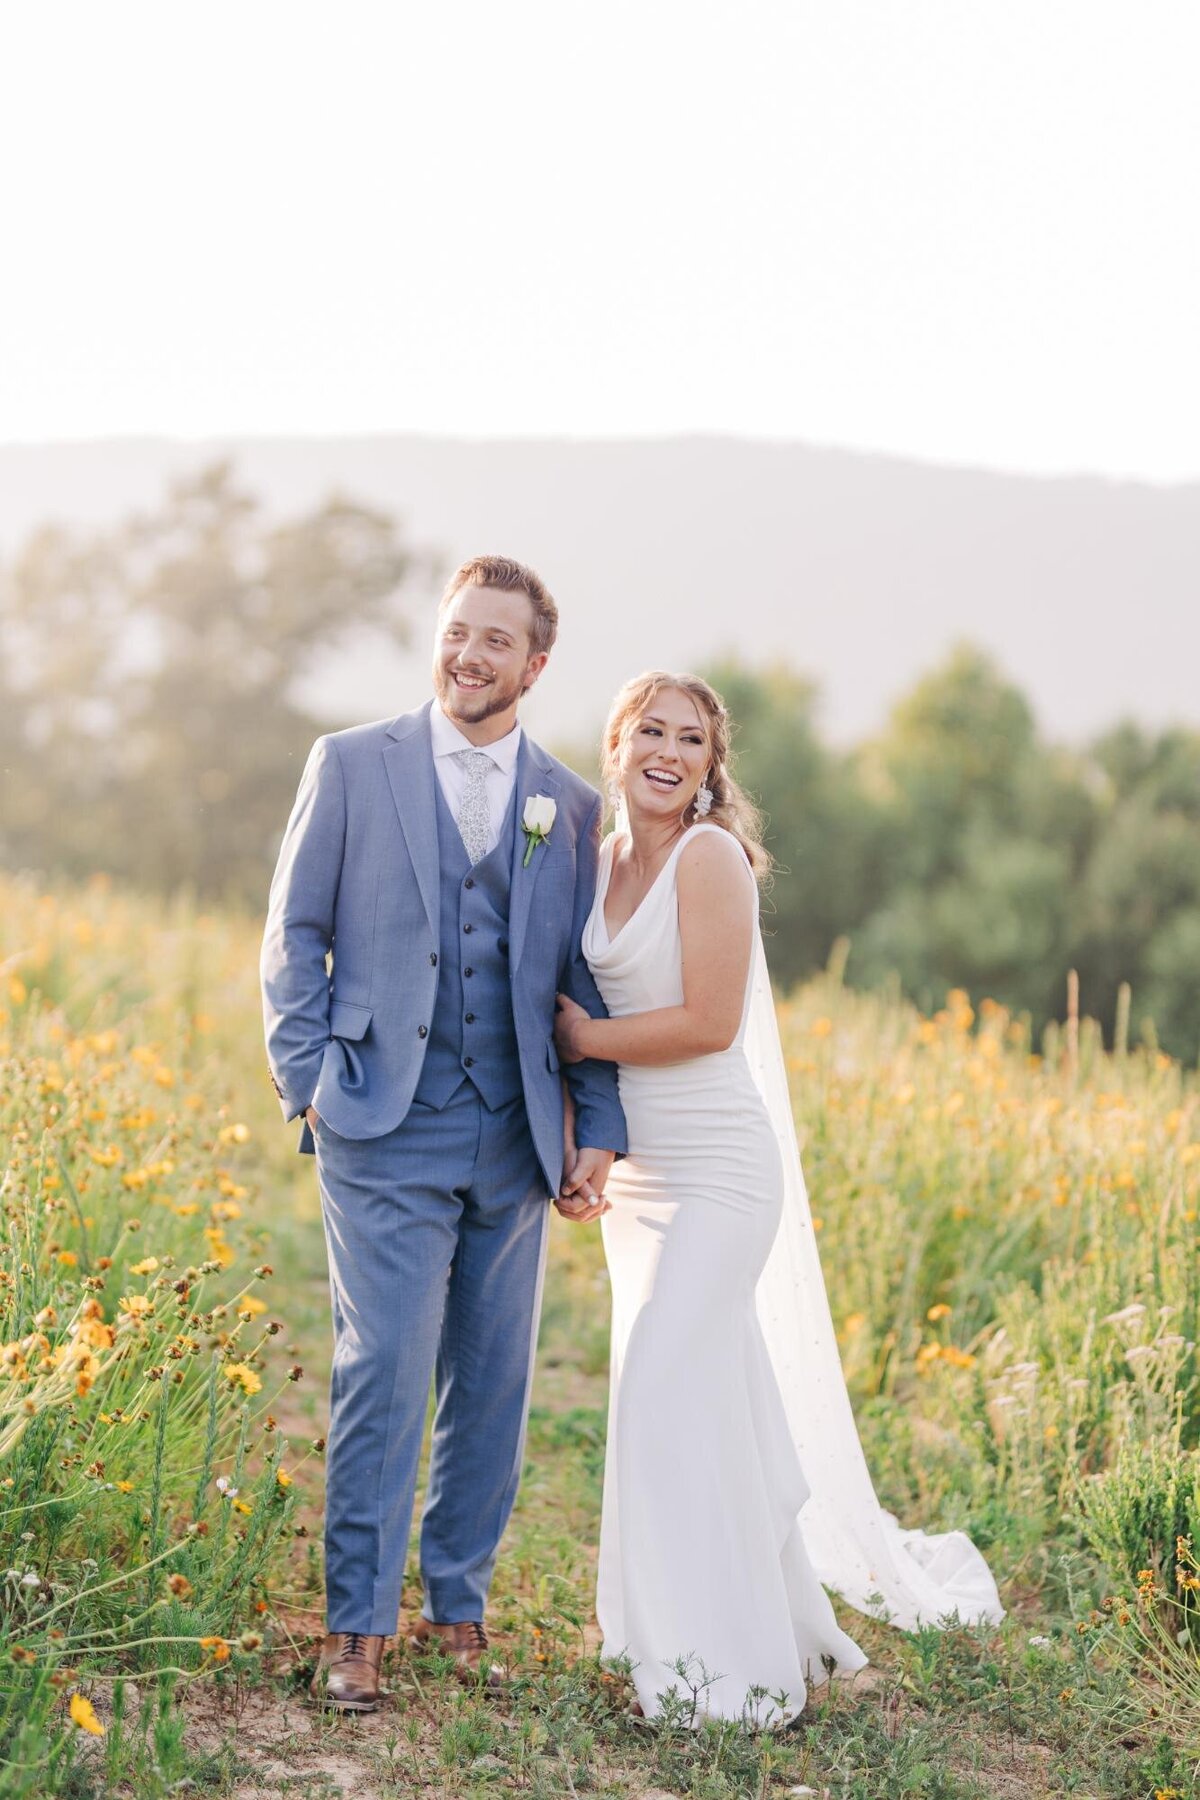 Bride and groom smiling in a field with wildflowers.